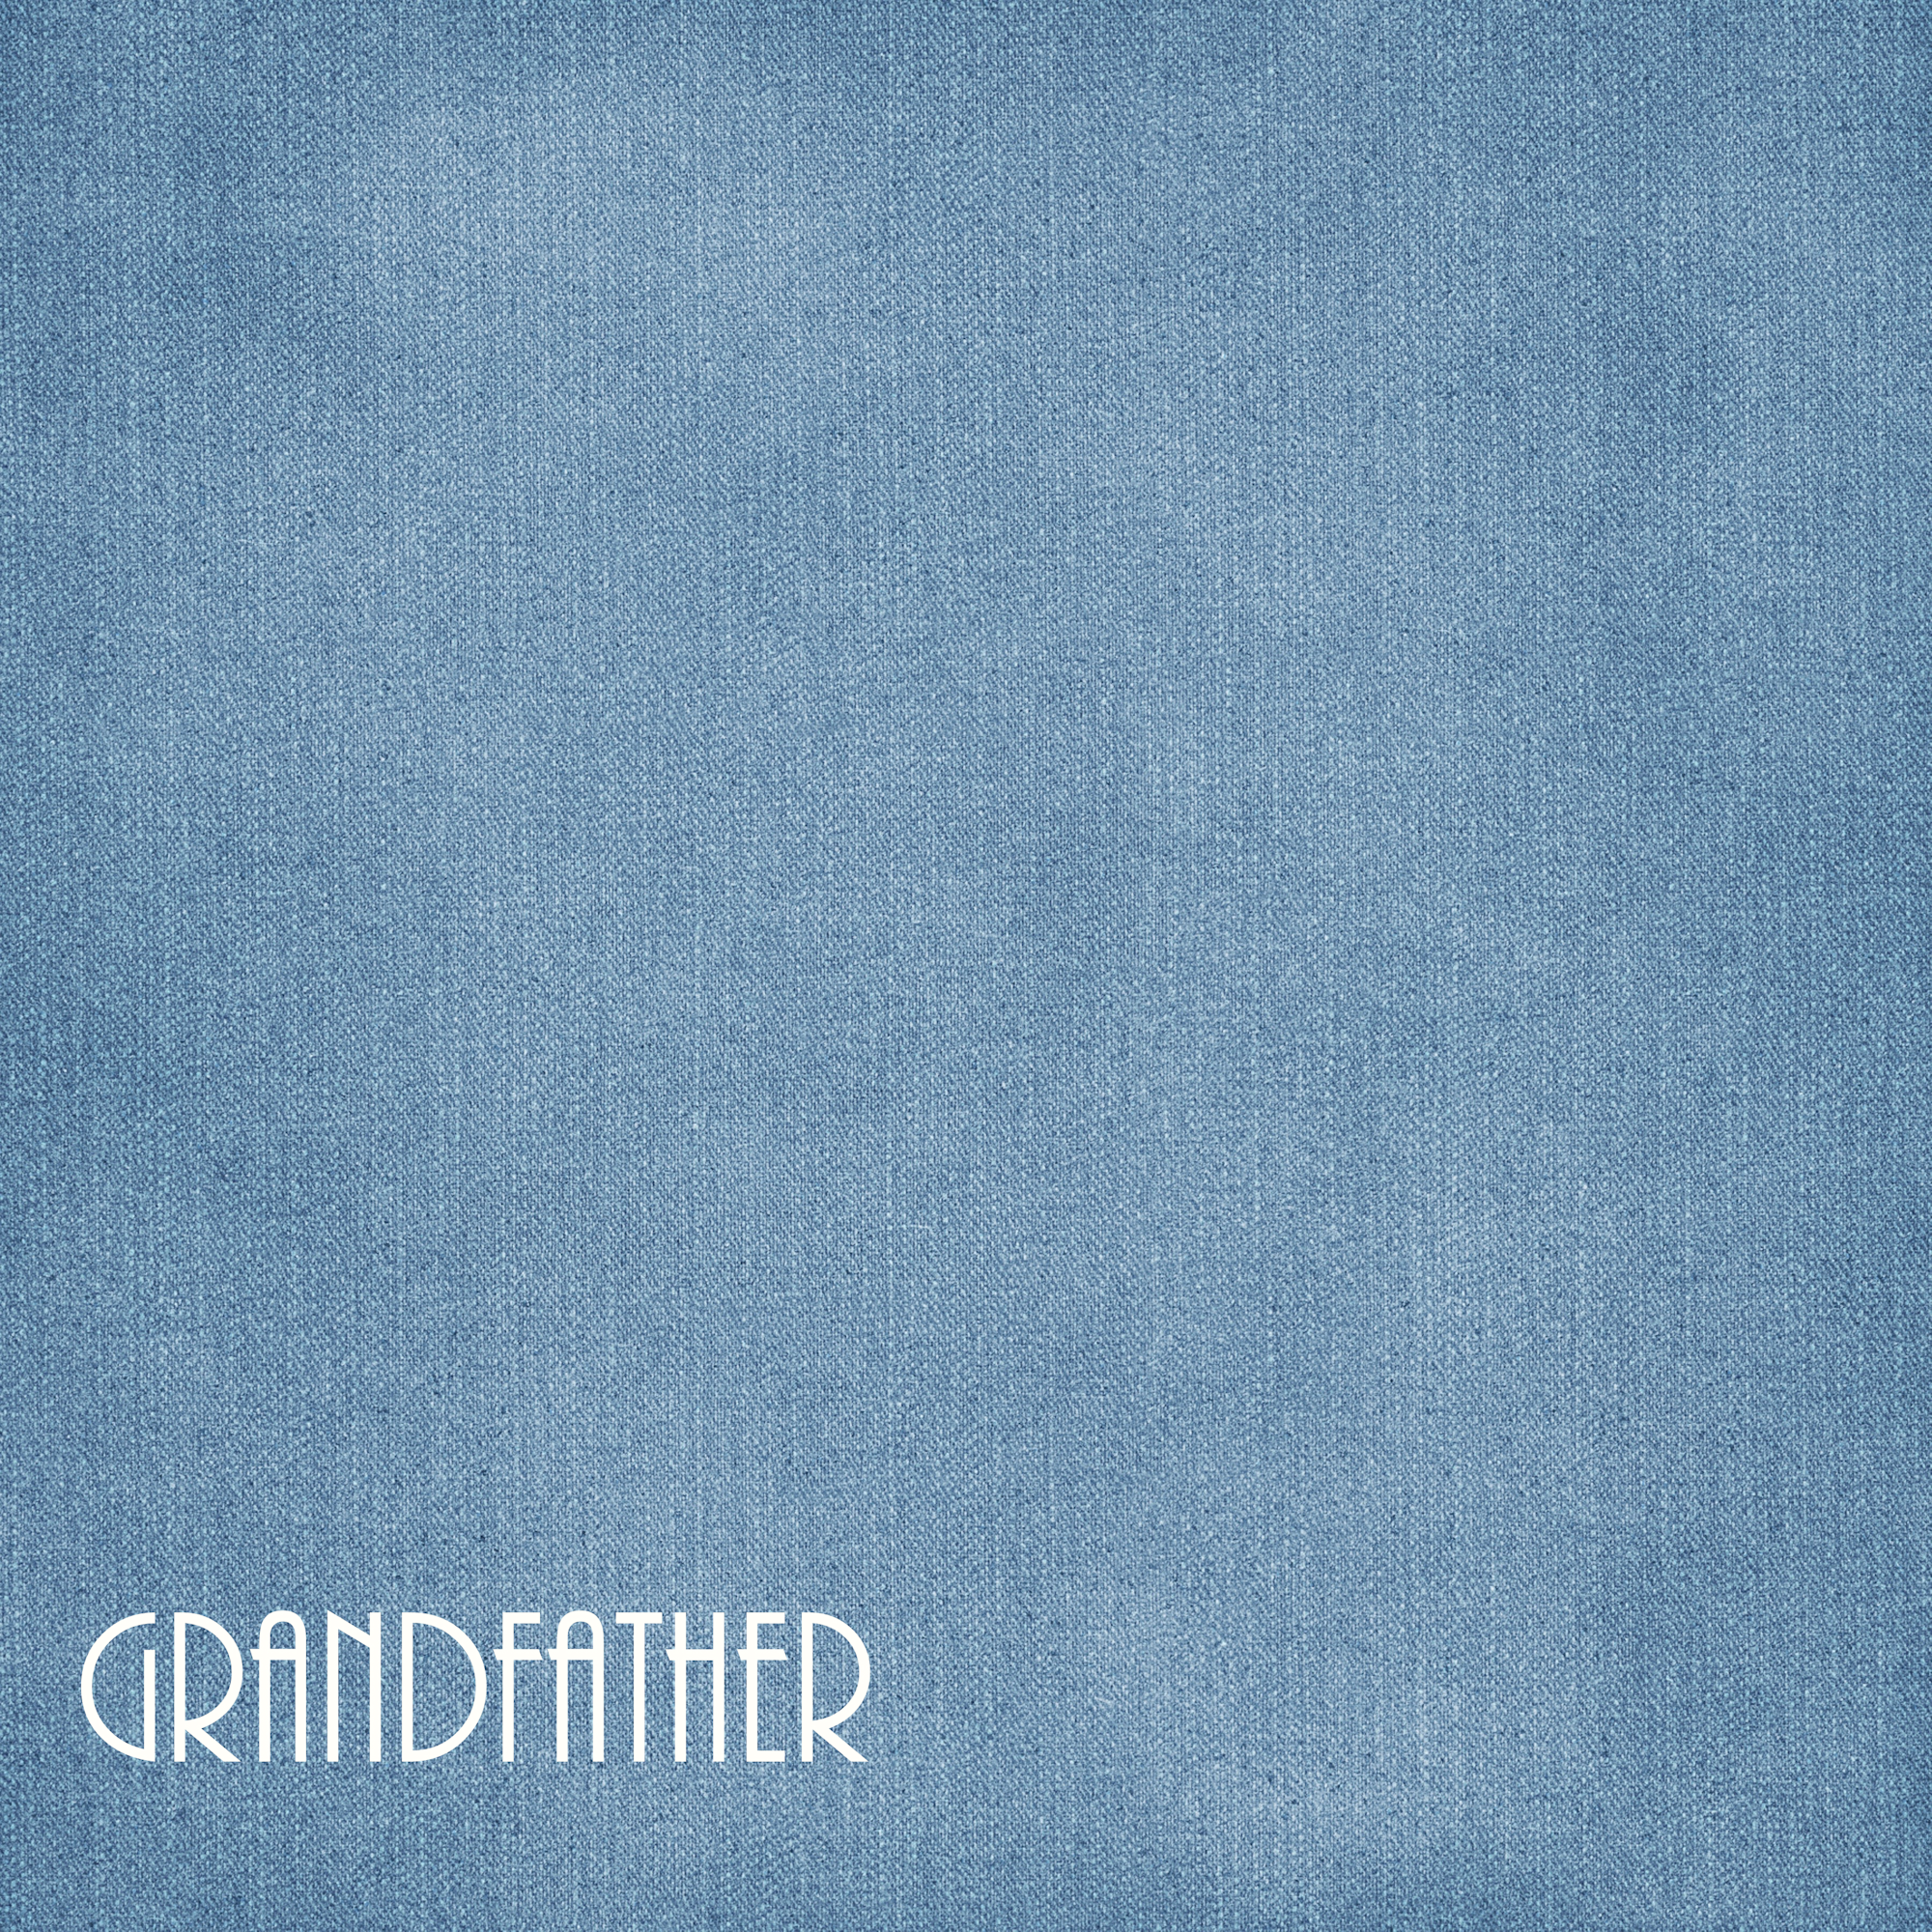 Family Collection Grandfather 12 x 12 Double-Sided Scrapbook Paper by SSC Designs